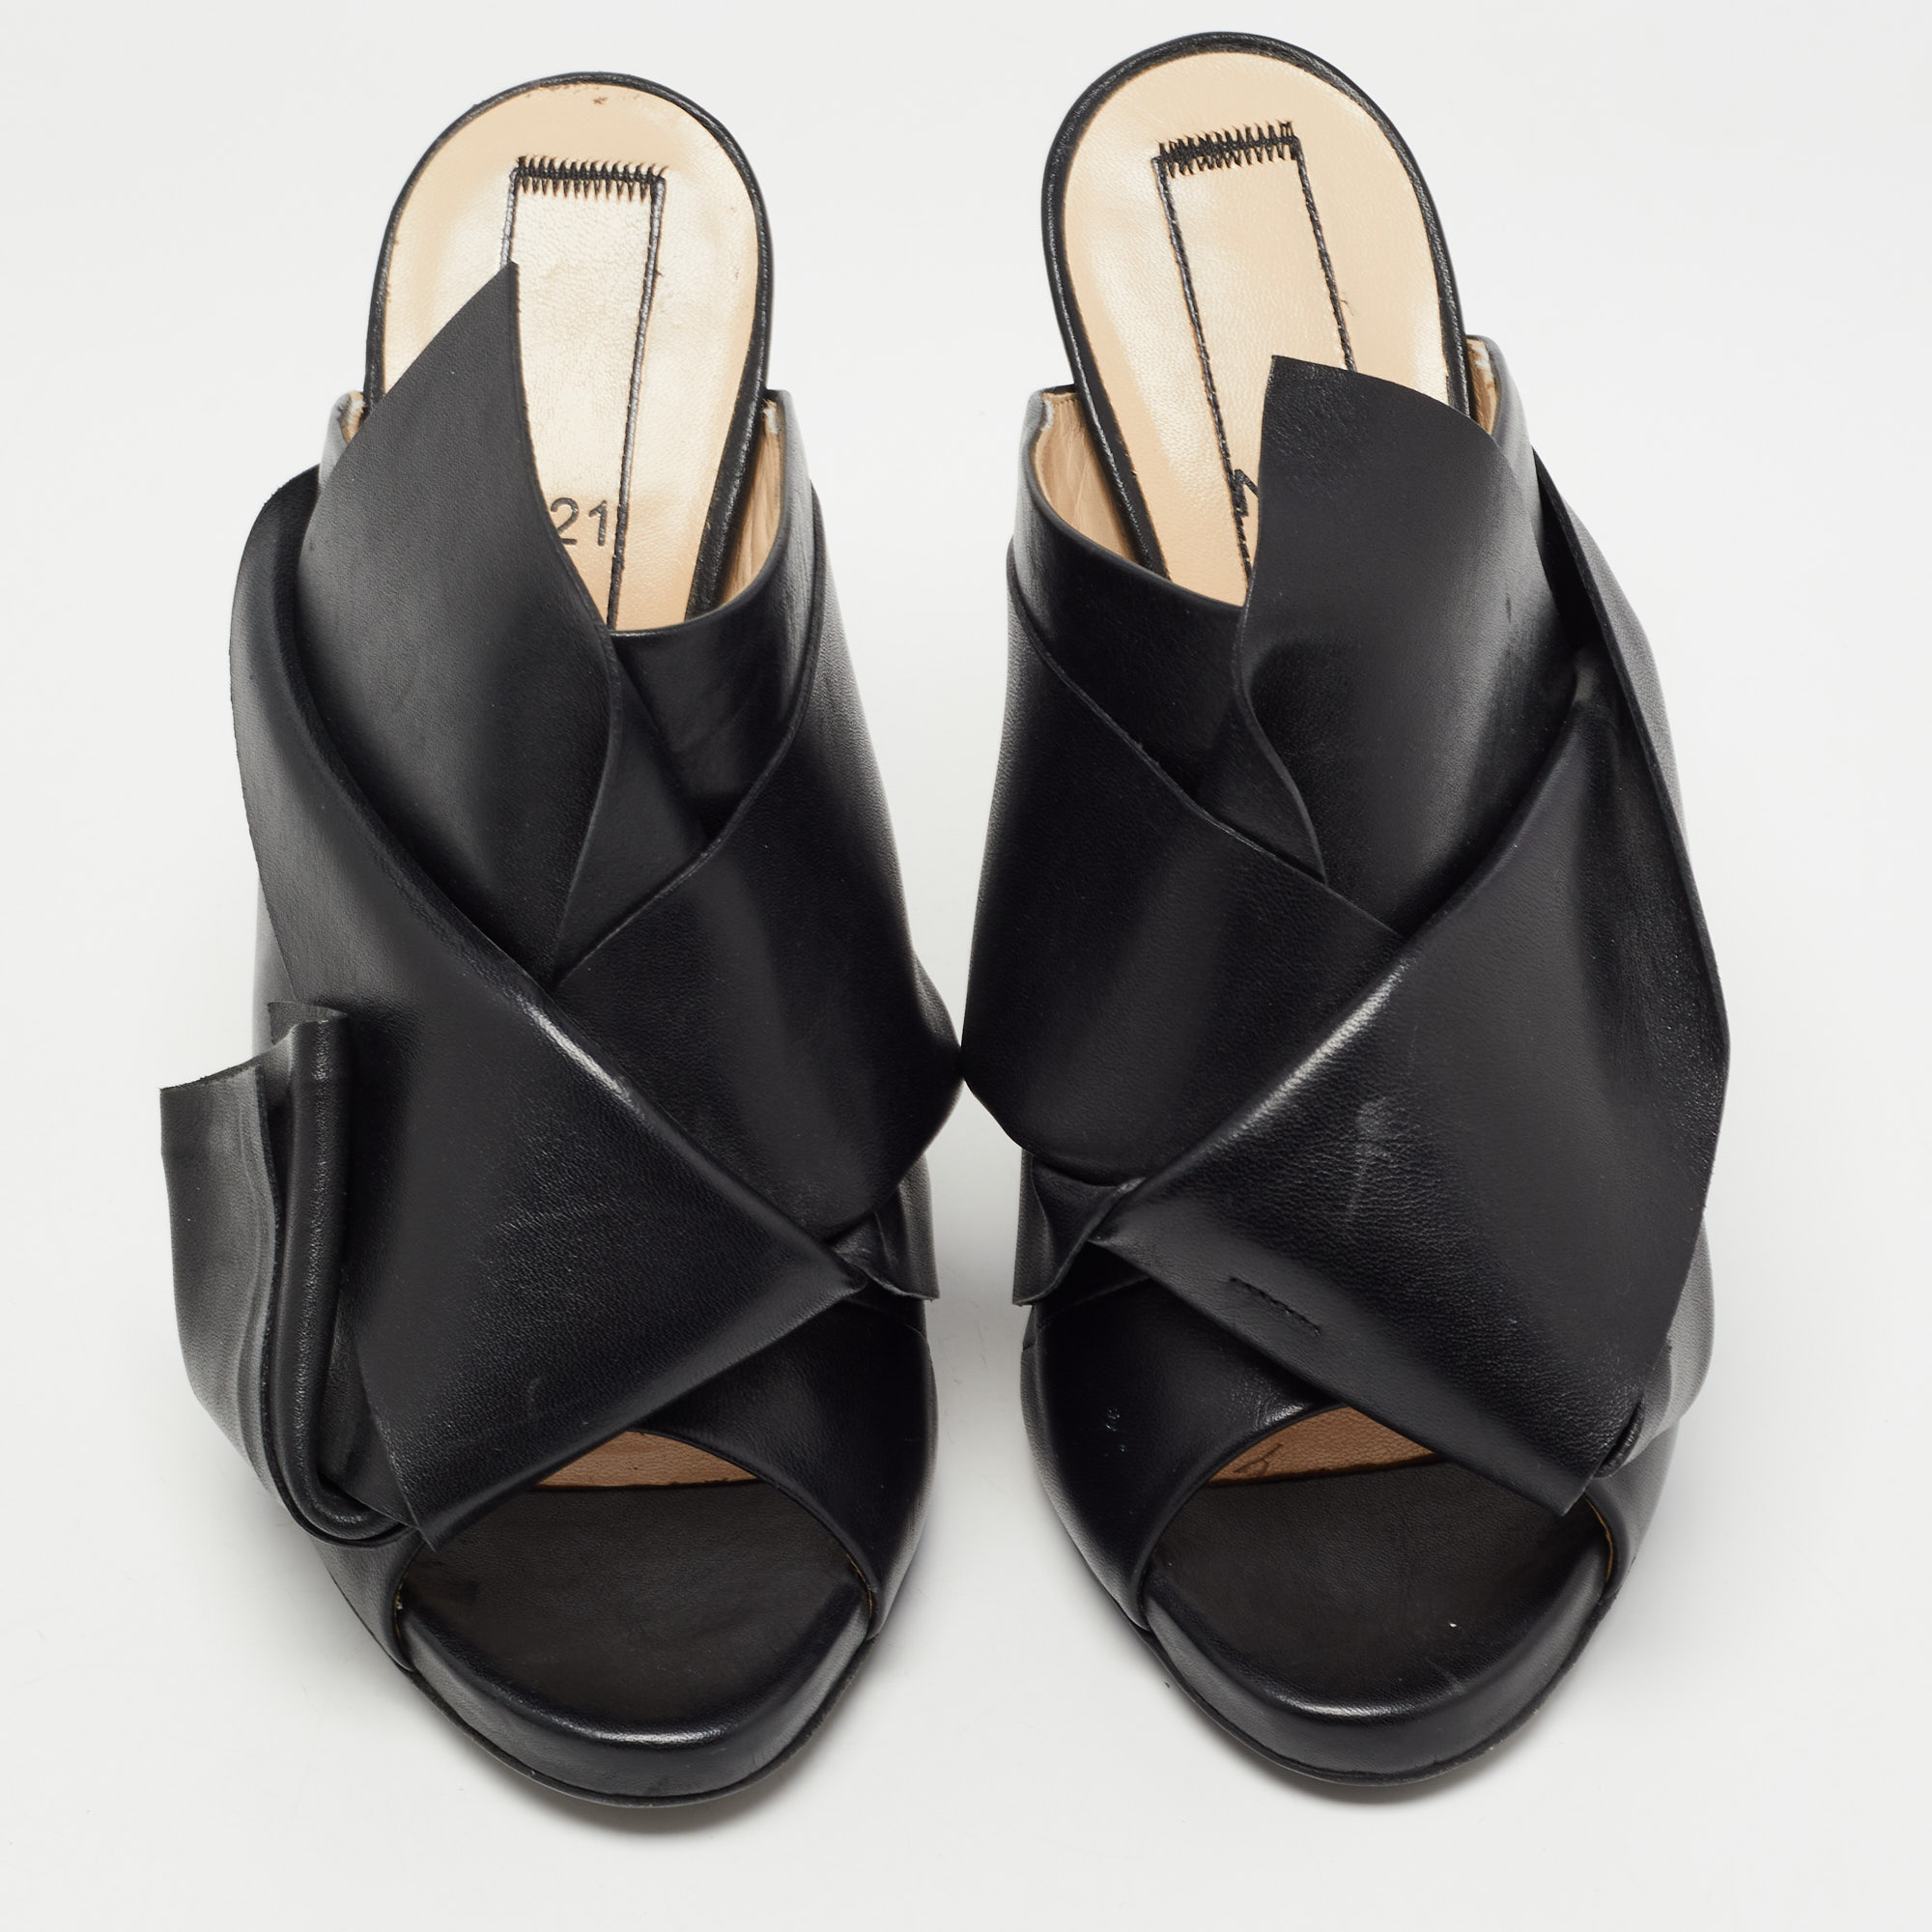 N21 Black Leather Raso Knot Mules Size 37